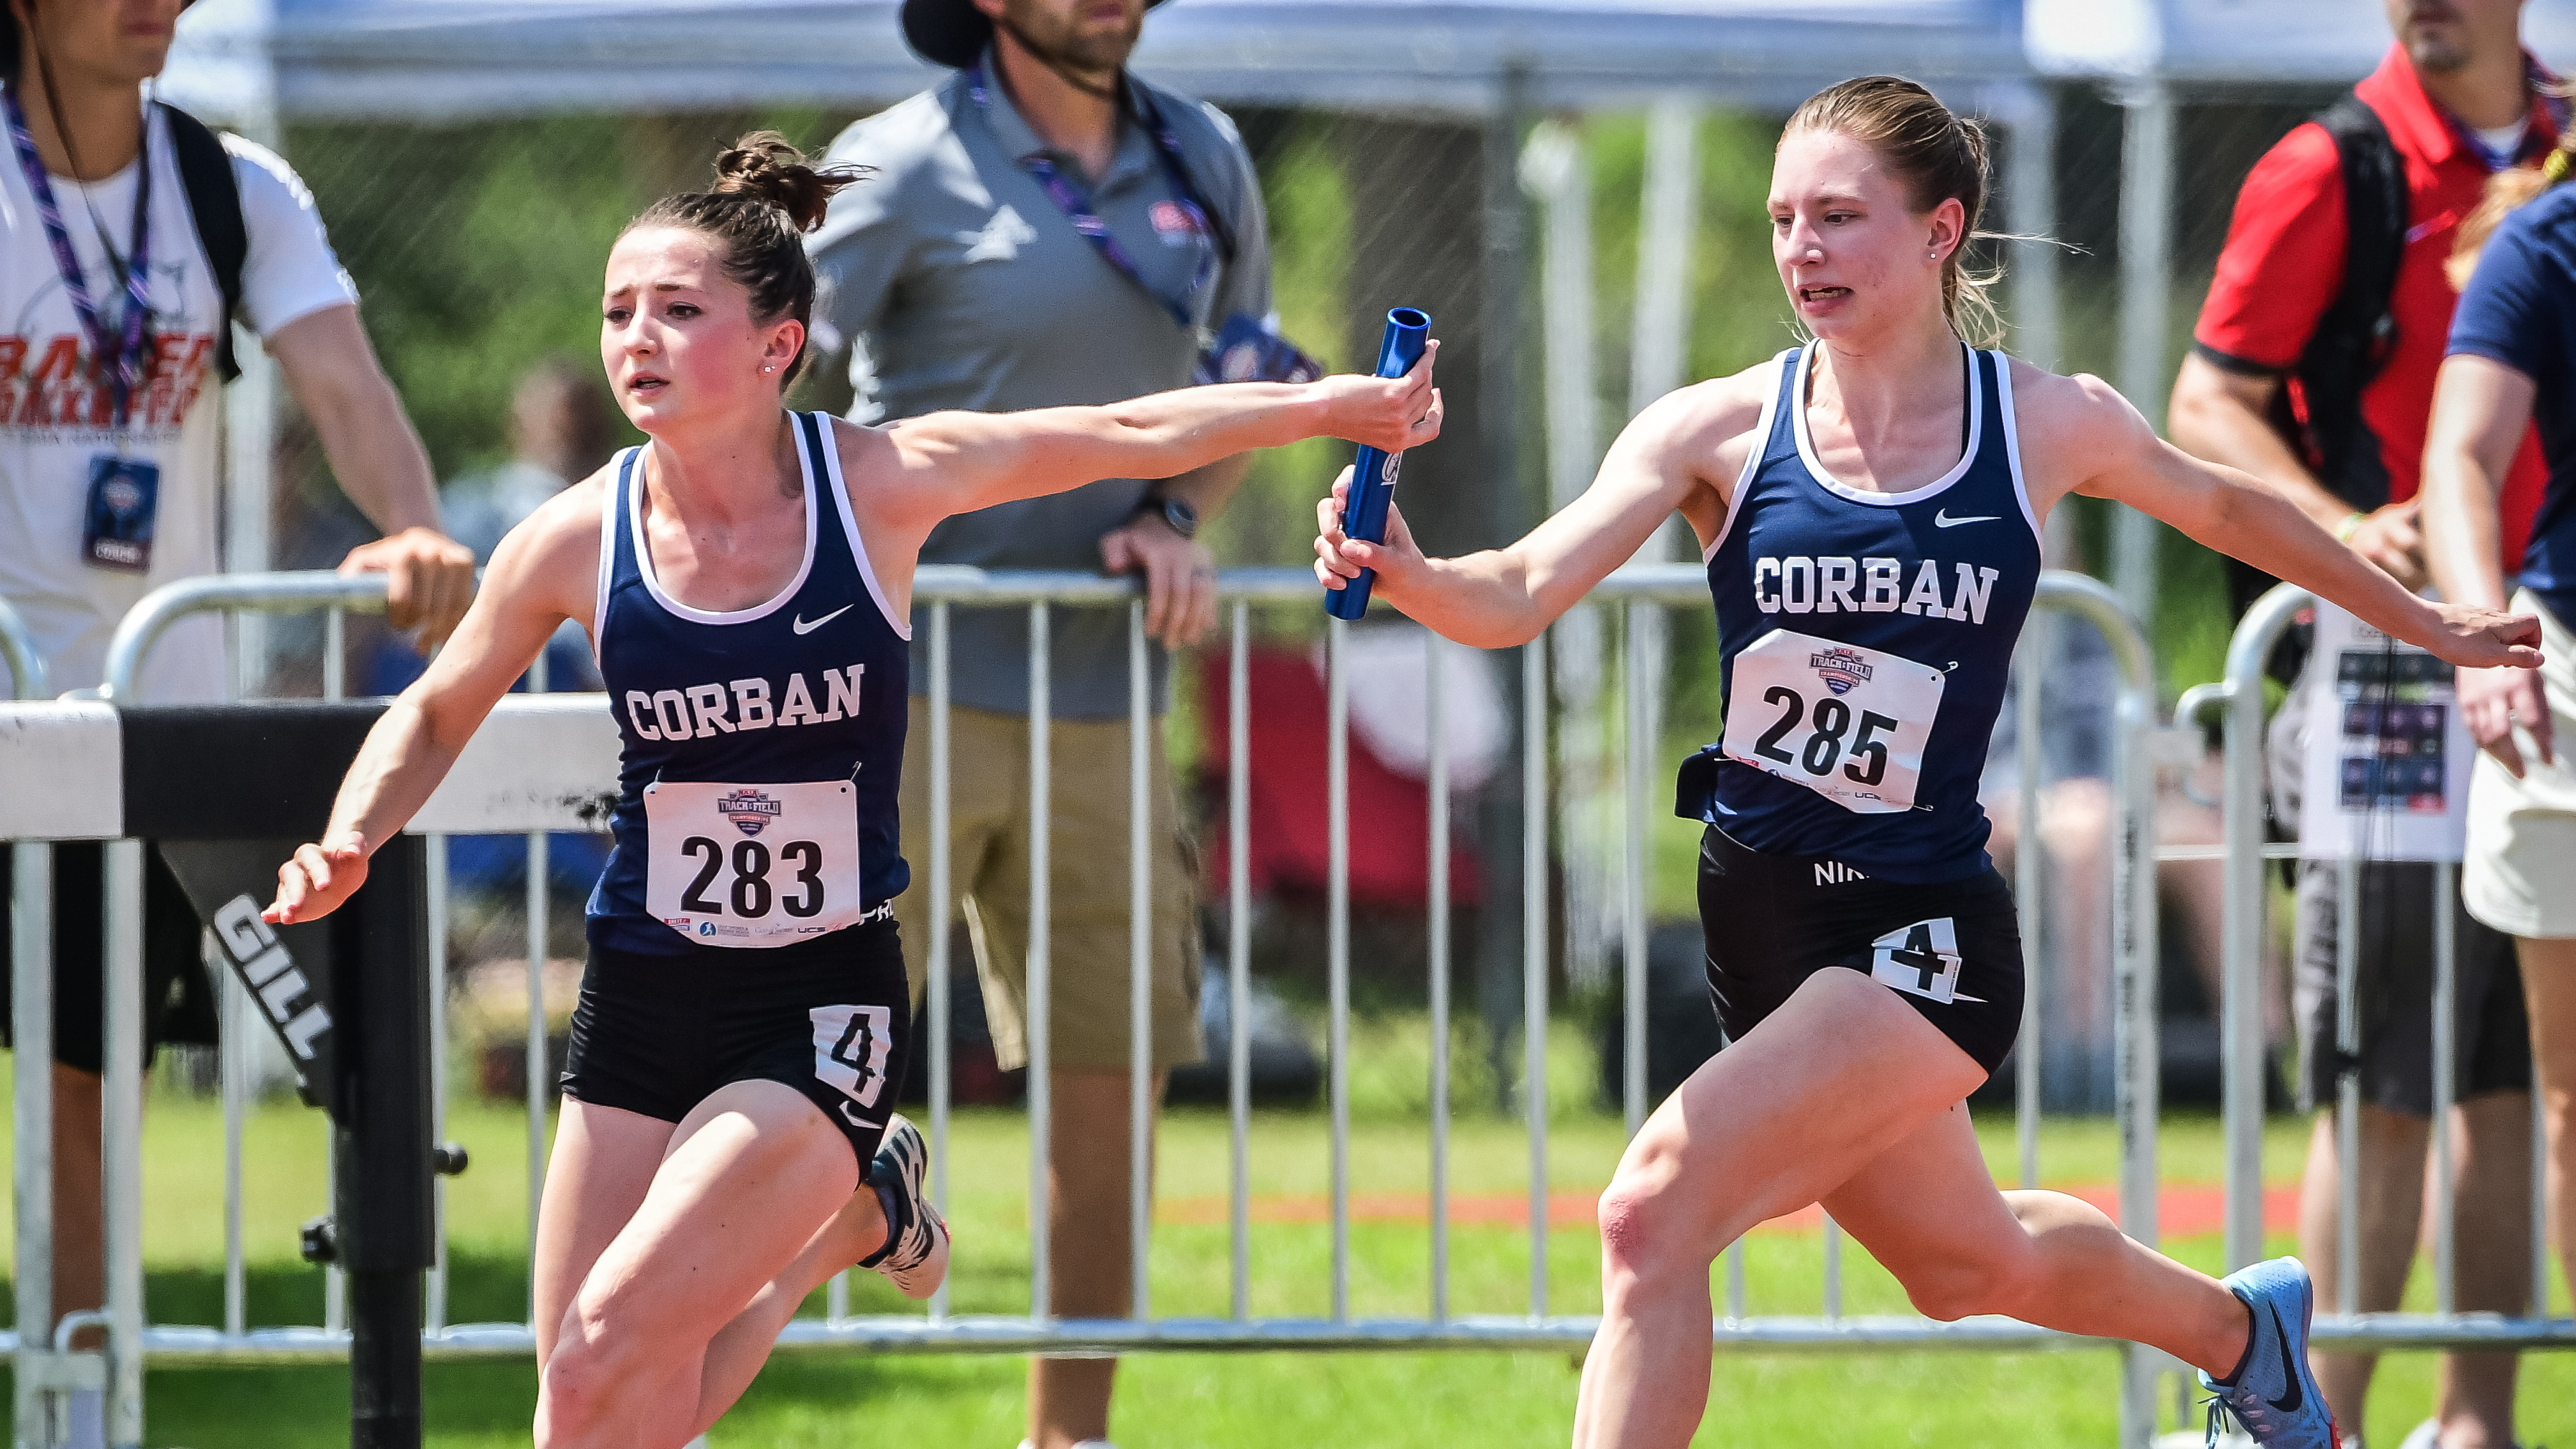 Day 1 - 2019 Women's Outdoor Track & Field Championships